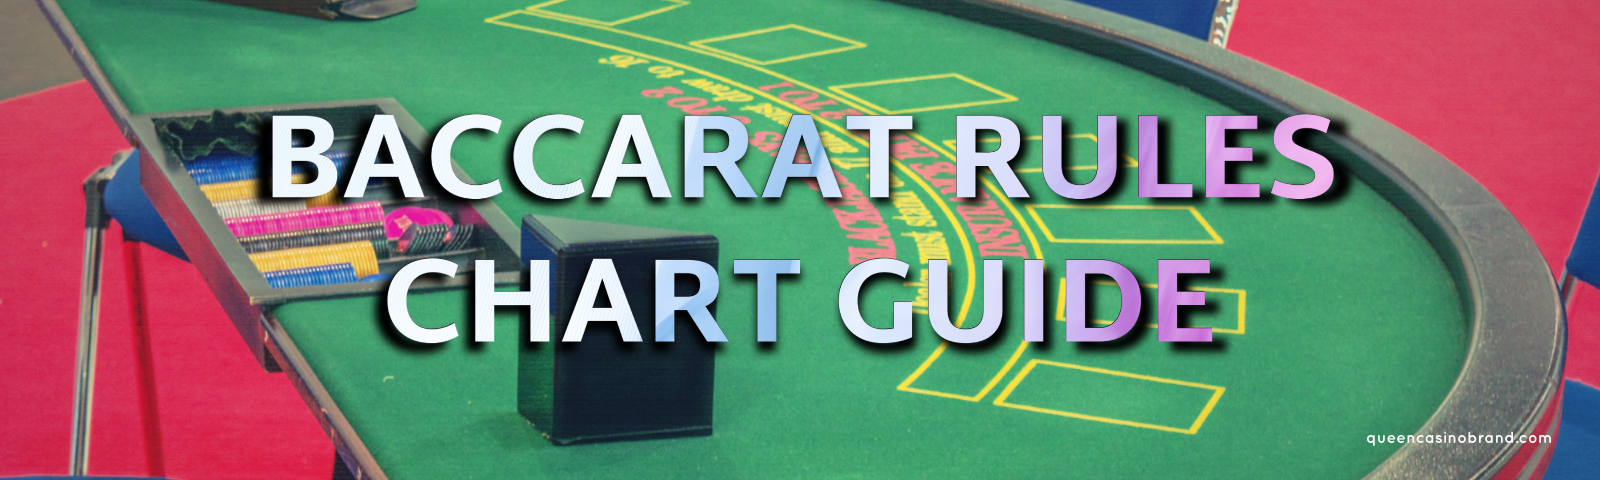 Baccarat Rules Chart Guide - Queen Casino Brand